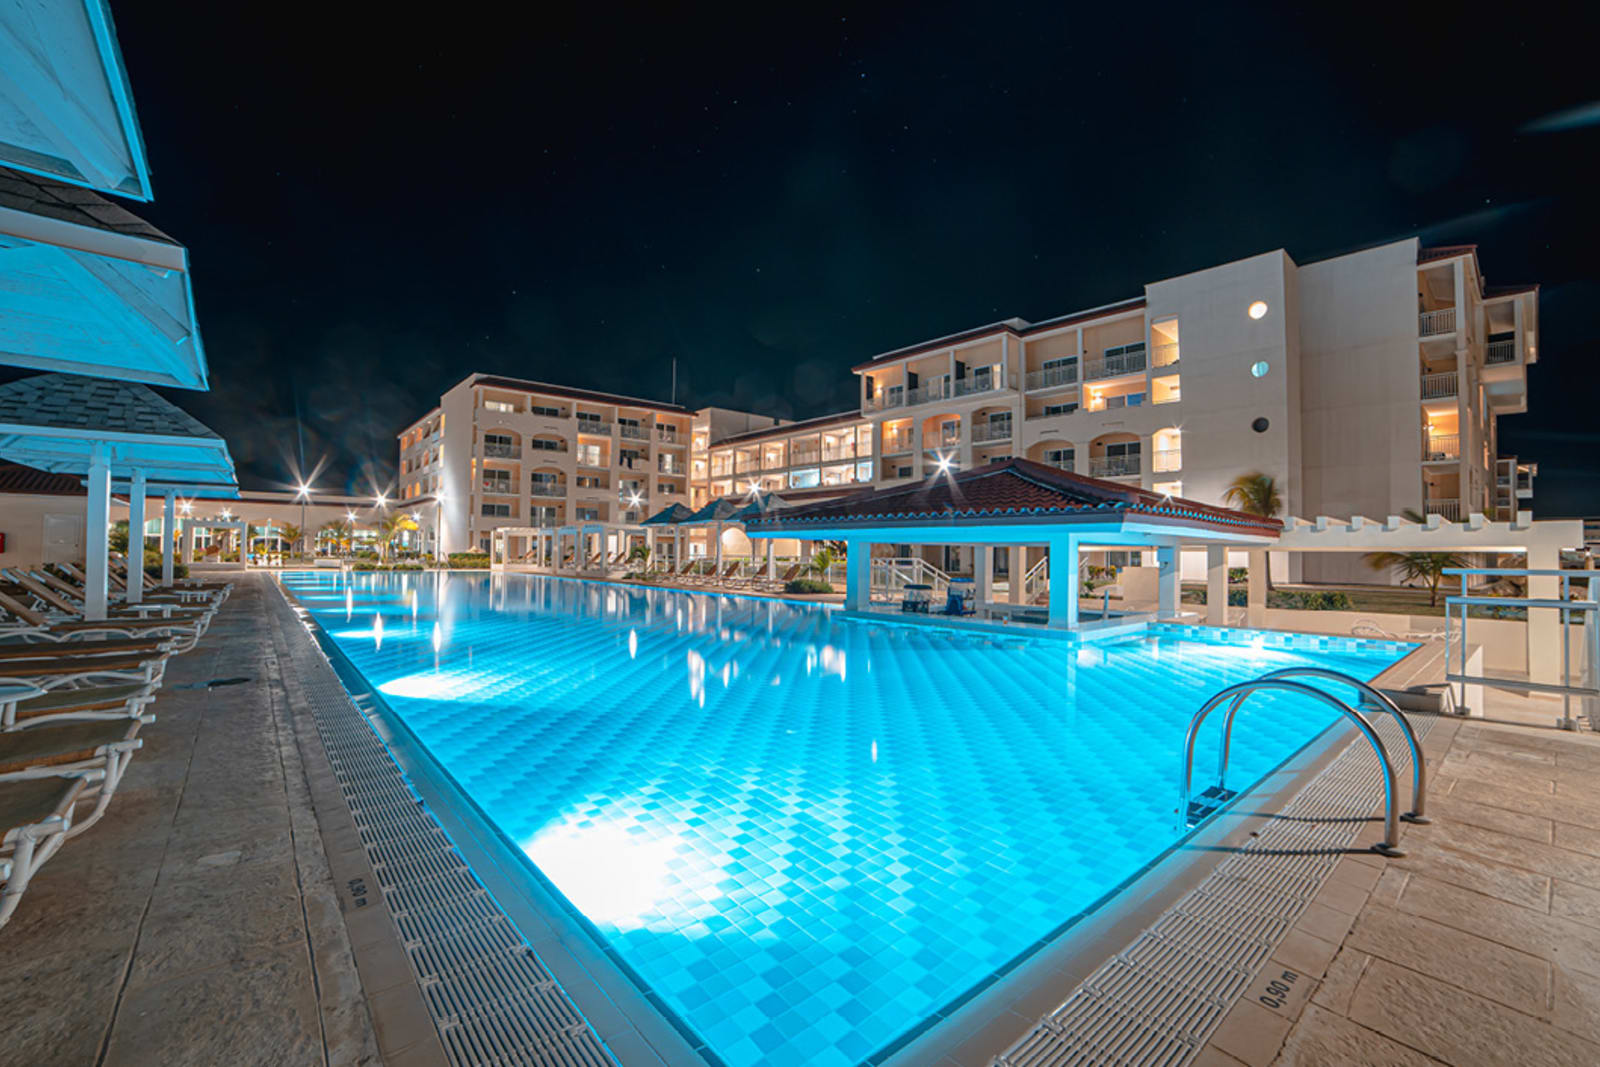 The pool at the adults-only all-inclusive Sanctuary at Grand Memories resort in Varadero, Cuba looks especially beautiful at night